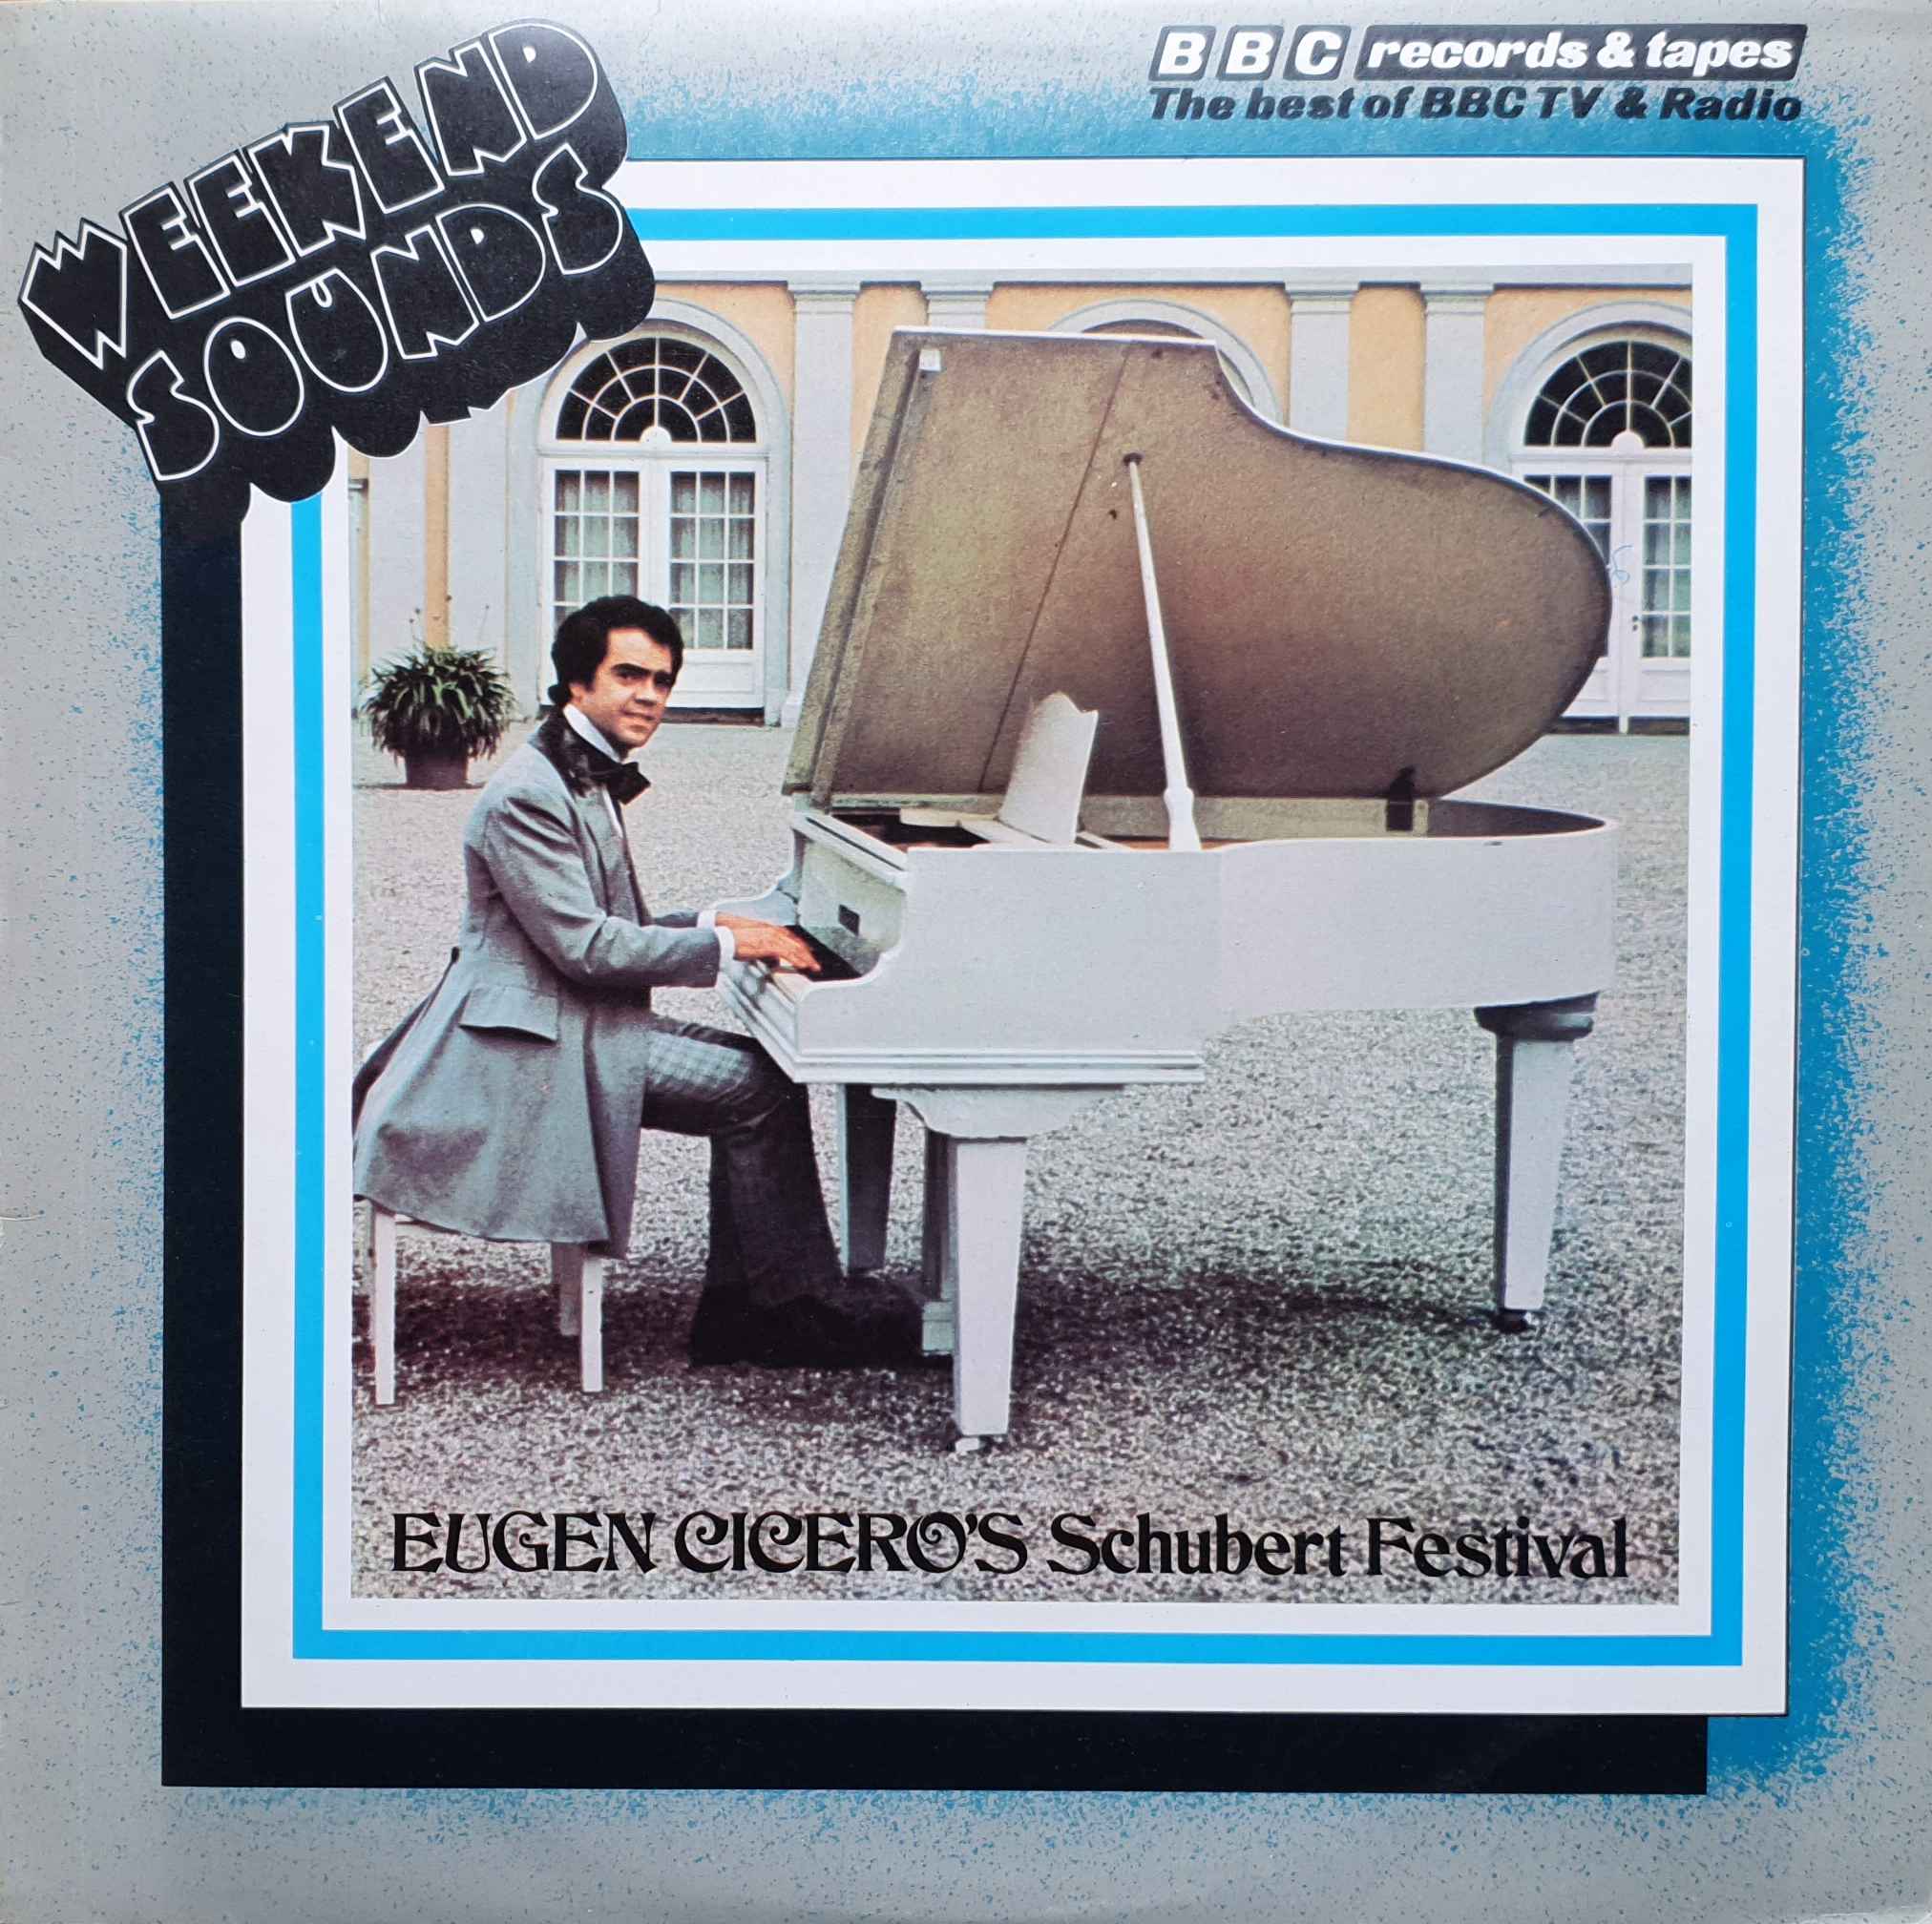 Picture of REC 261 Eugen Cicero's Schubert Festival by artist Eugen Cicero from the BBC albums - Records and Tapes library